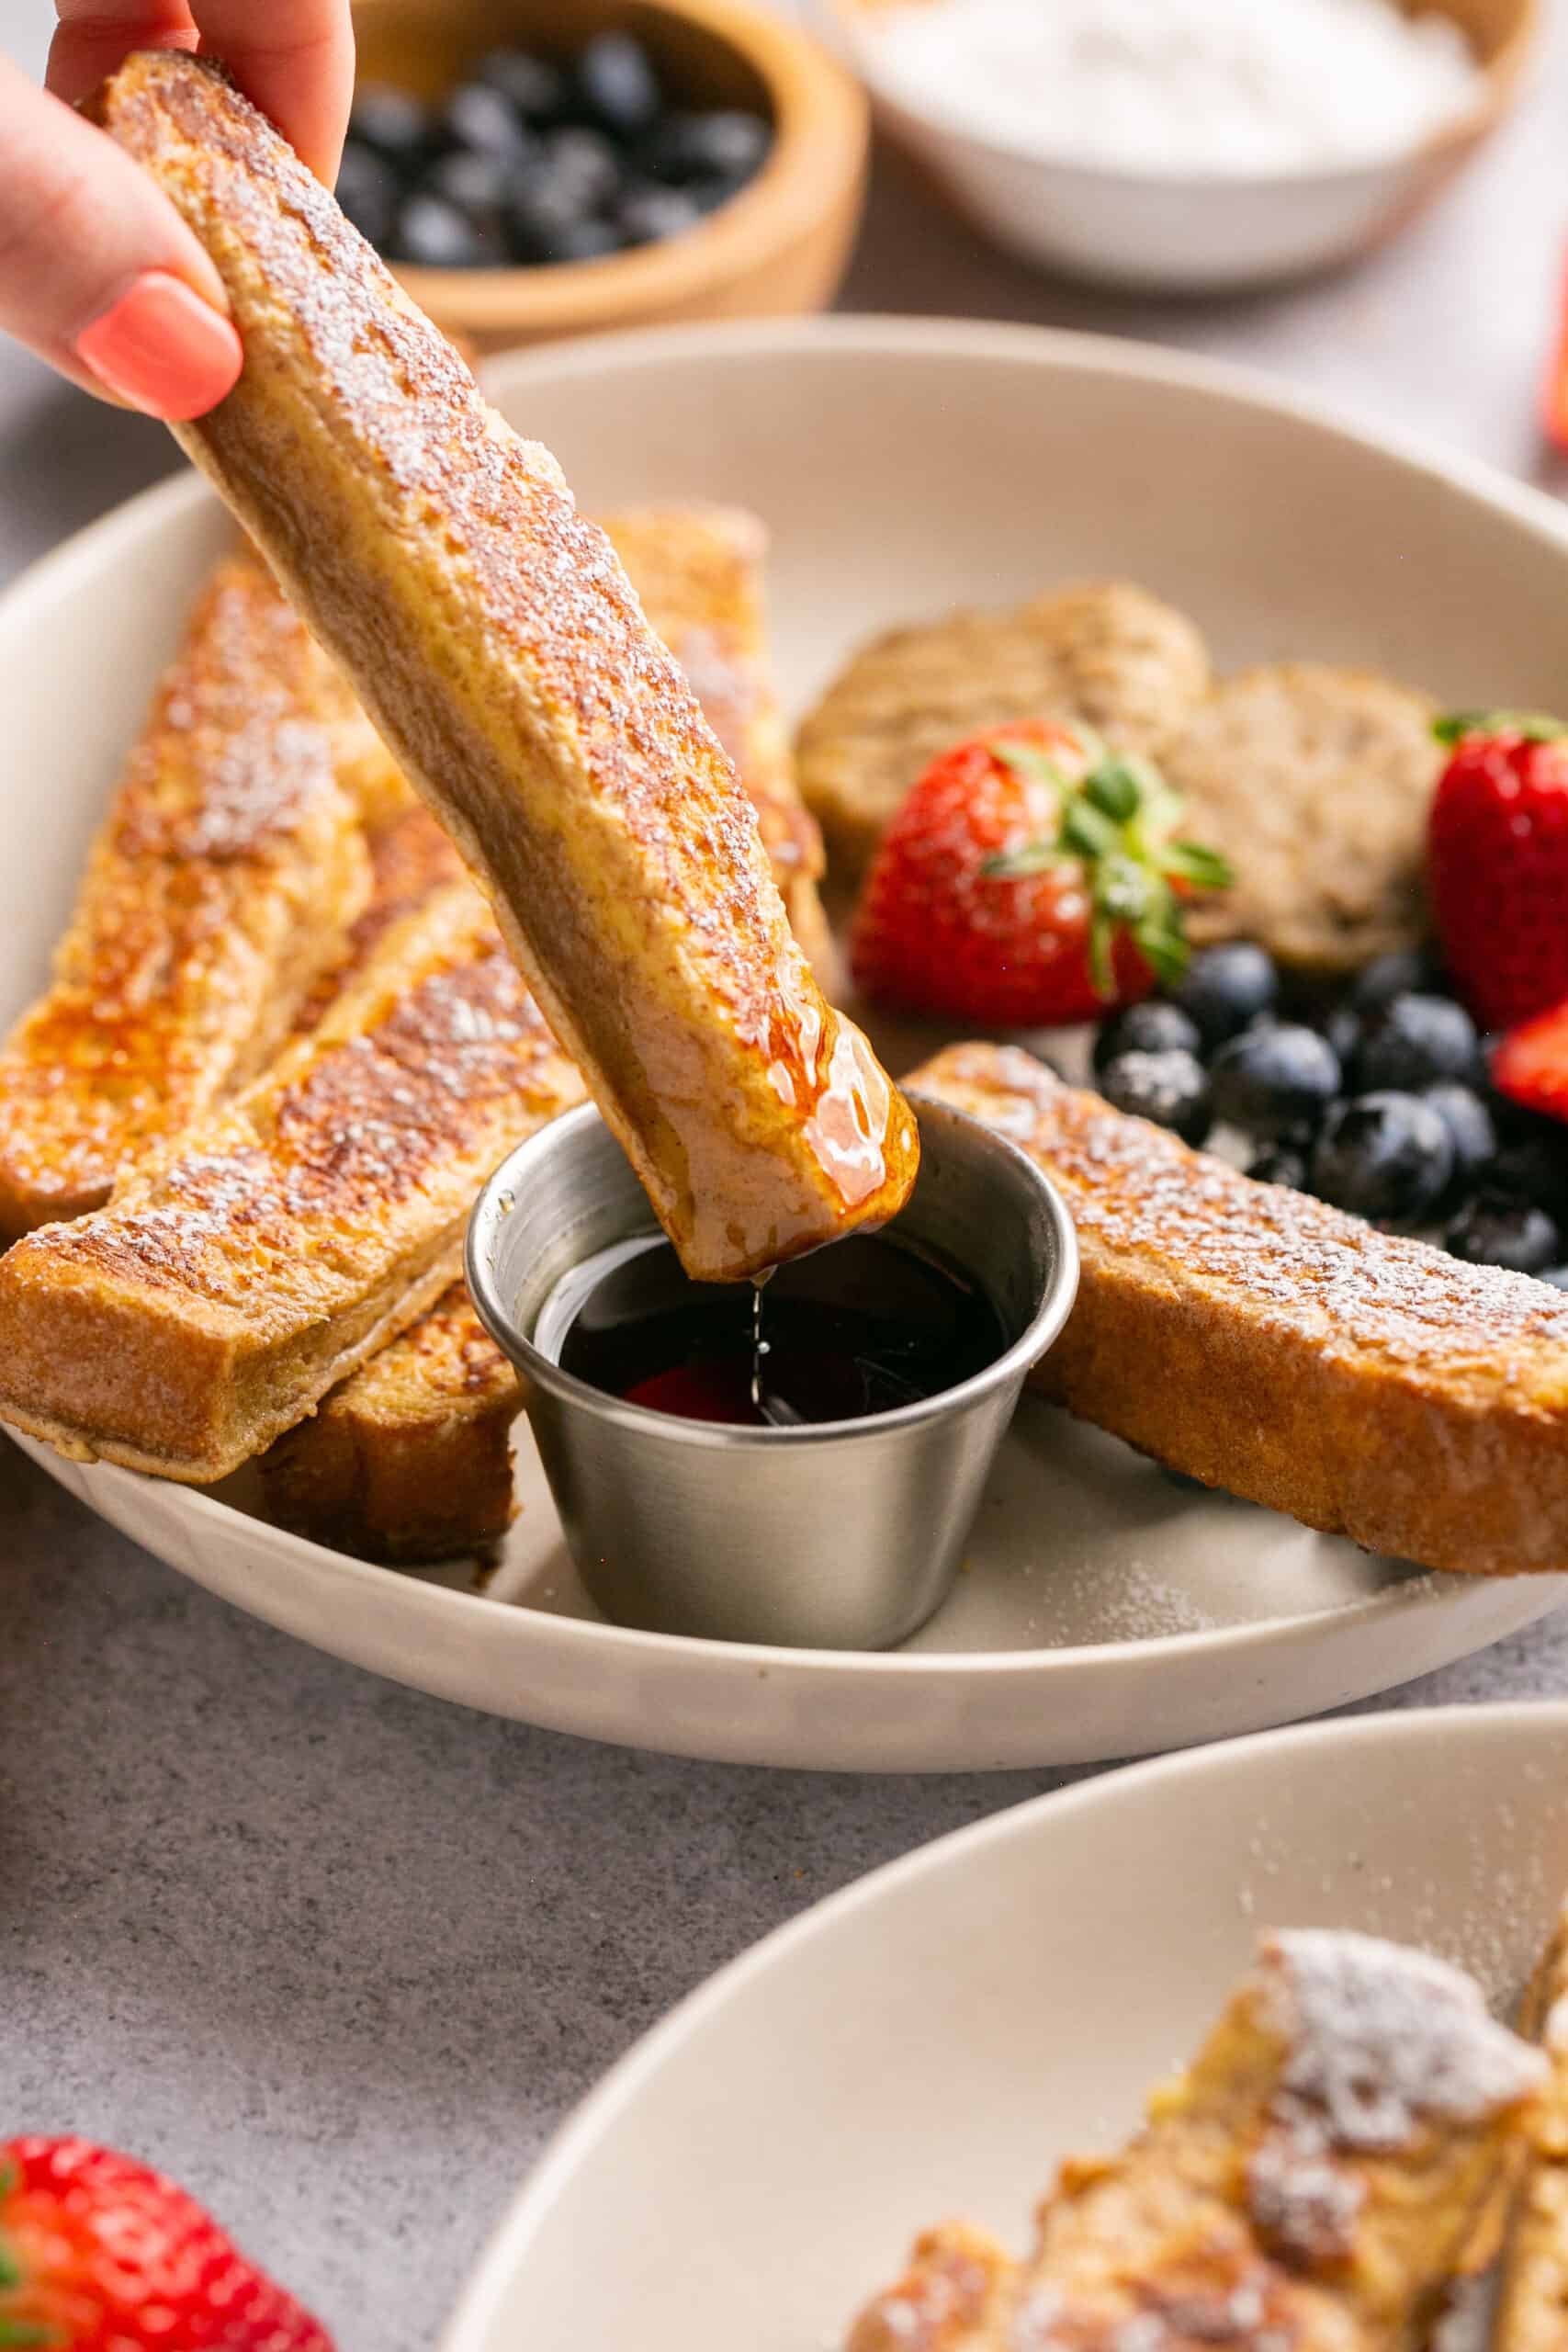 Protein french toast sticks on a plate with fruit, turkey sausage, and side of syrup.